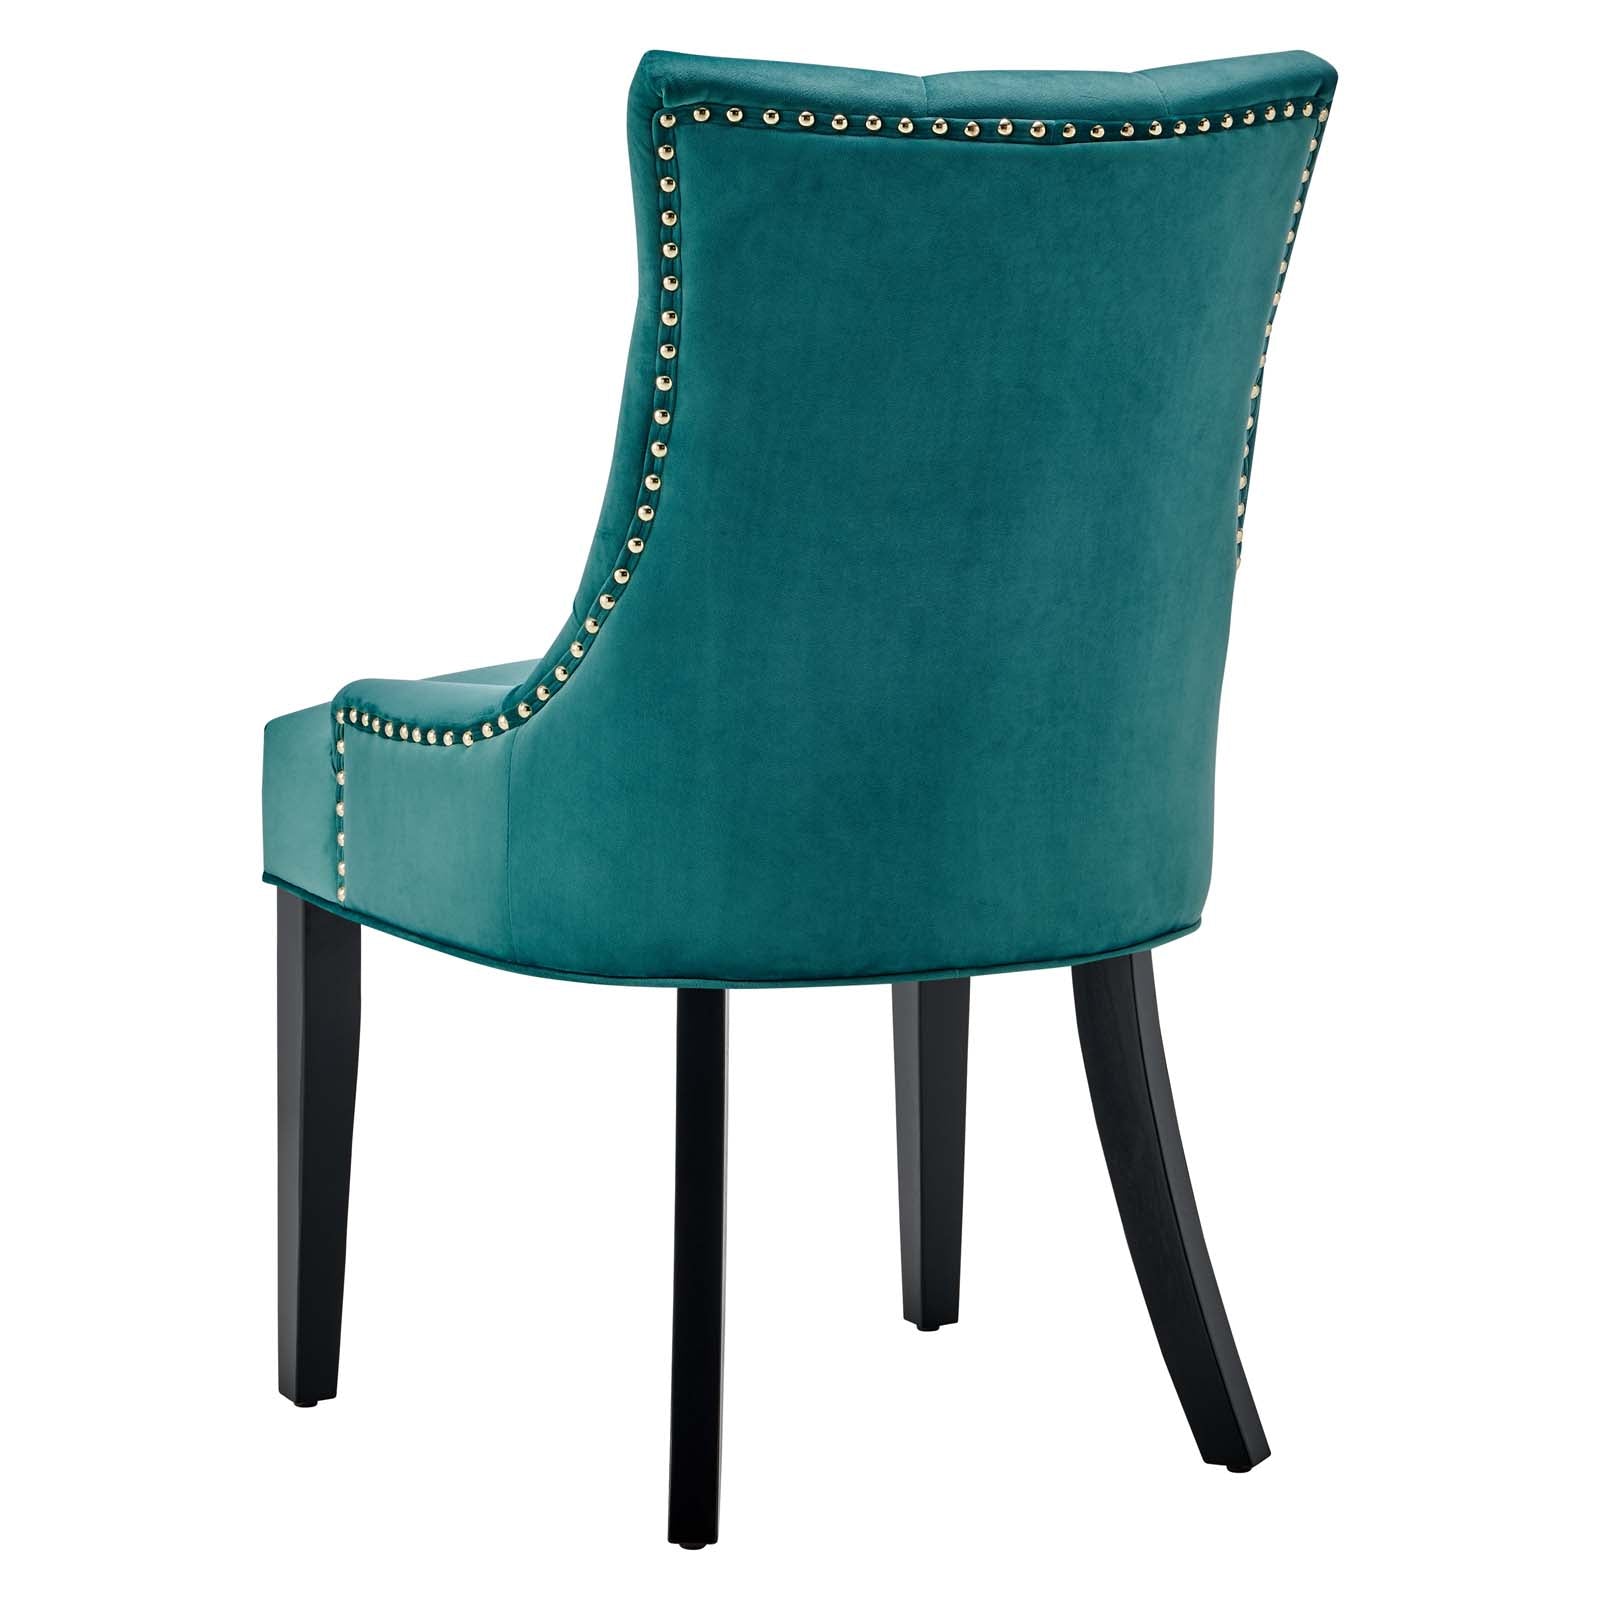 Modway Dining Chairs - Regent Tufted Performance Velvet Dining Side Chairs Teal ( Set of 2 )